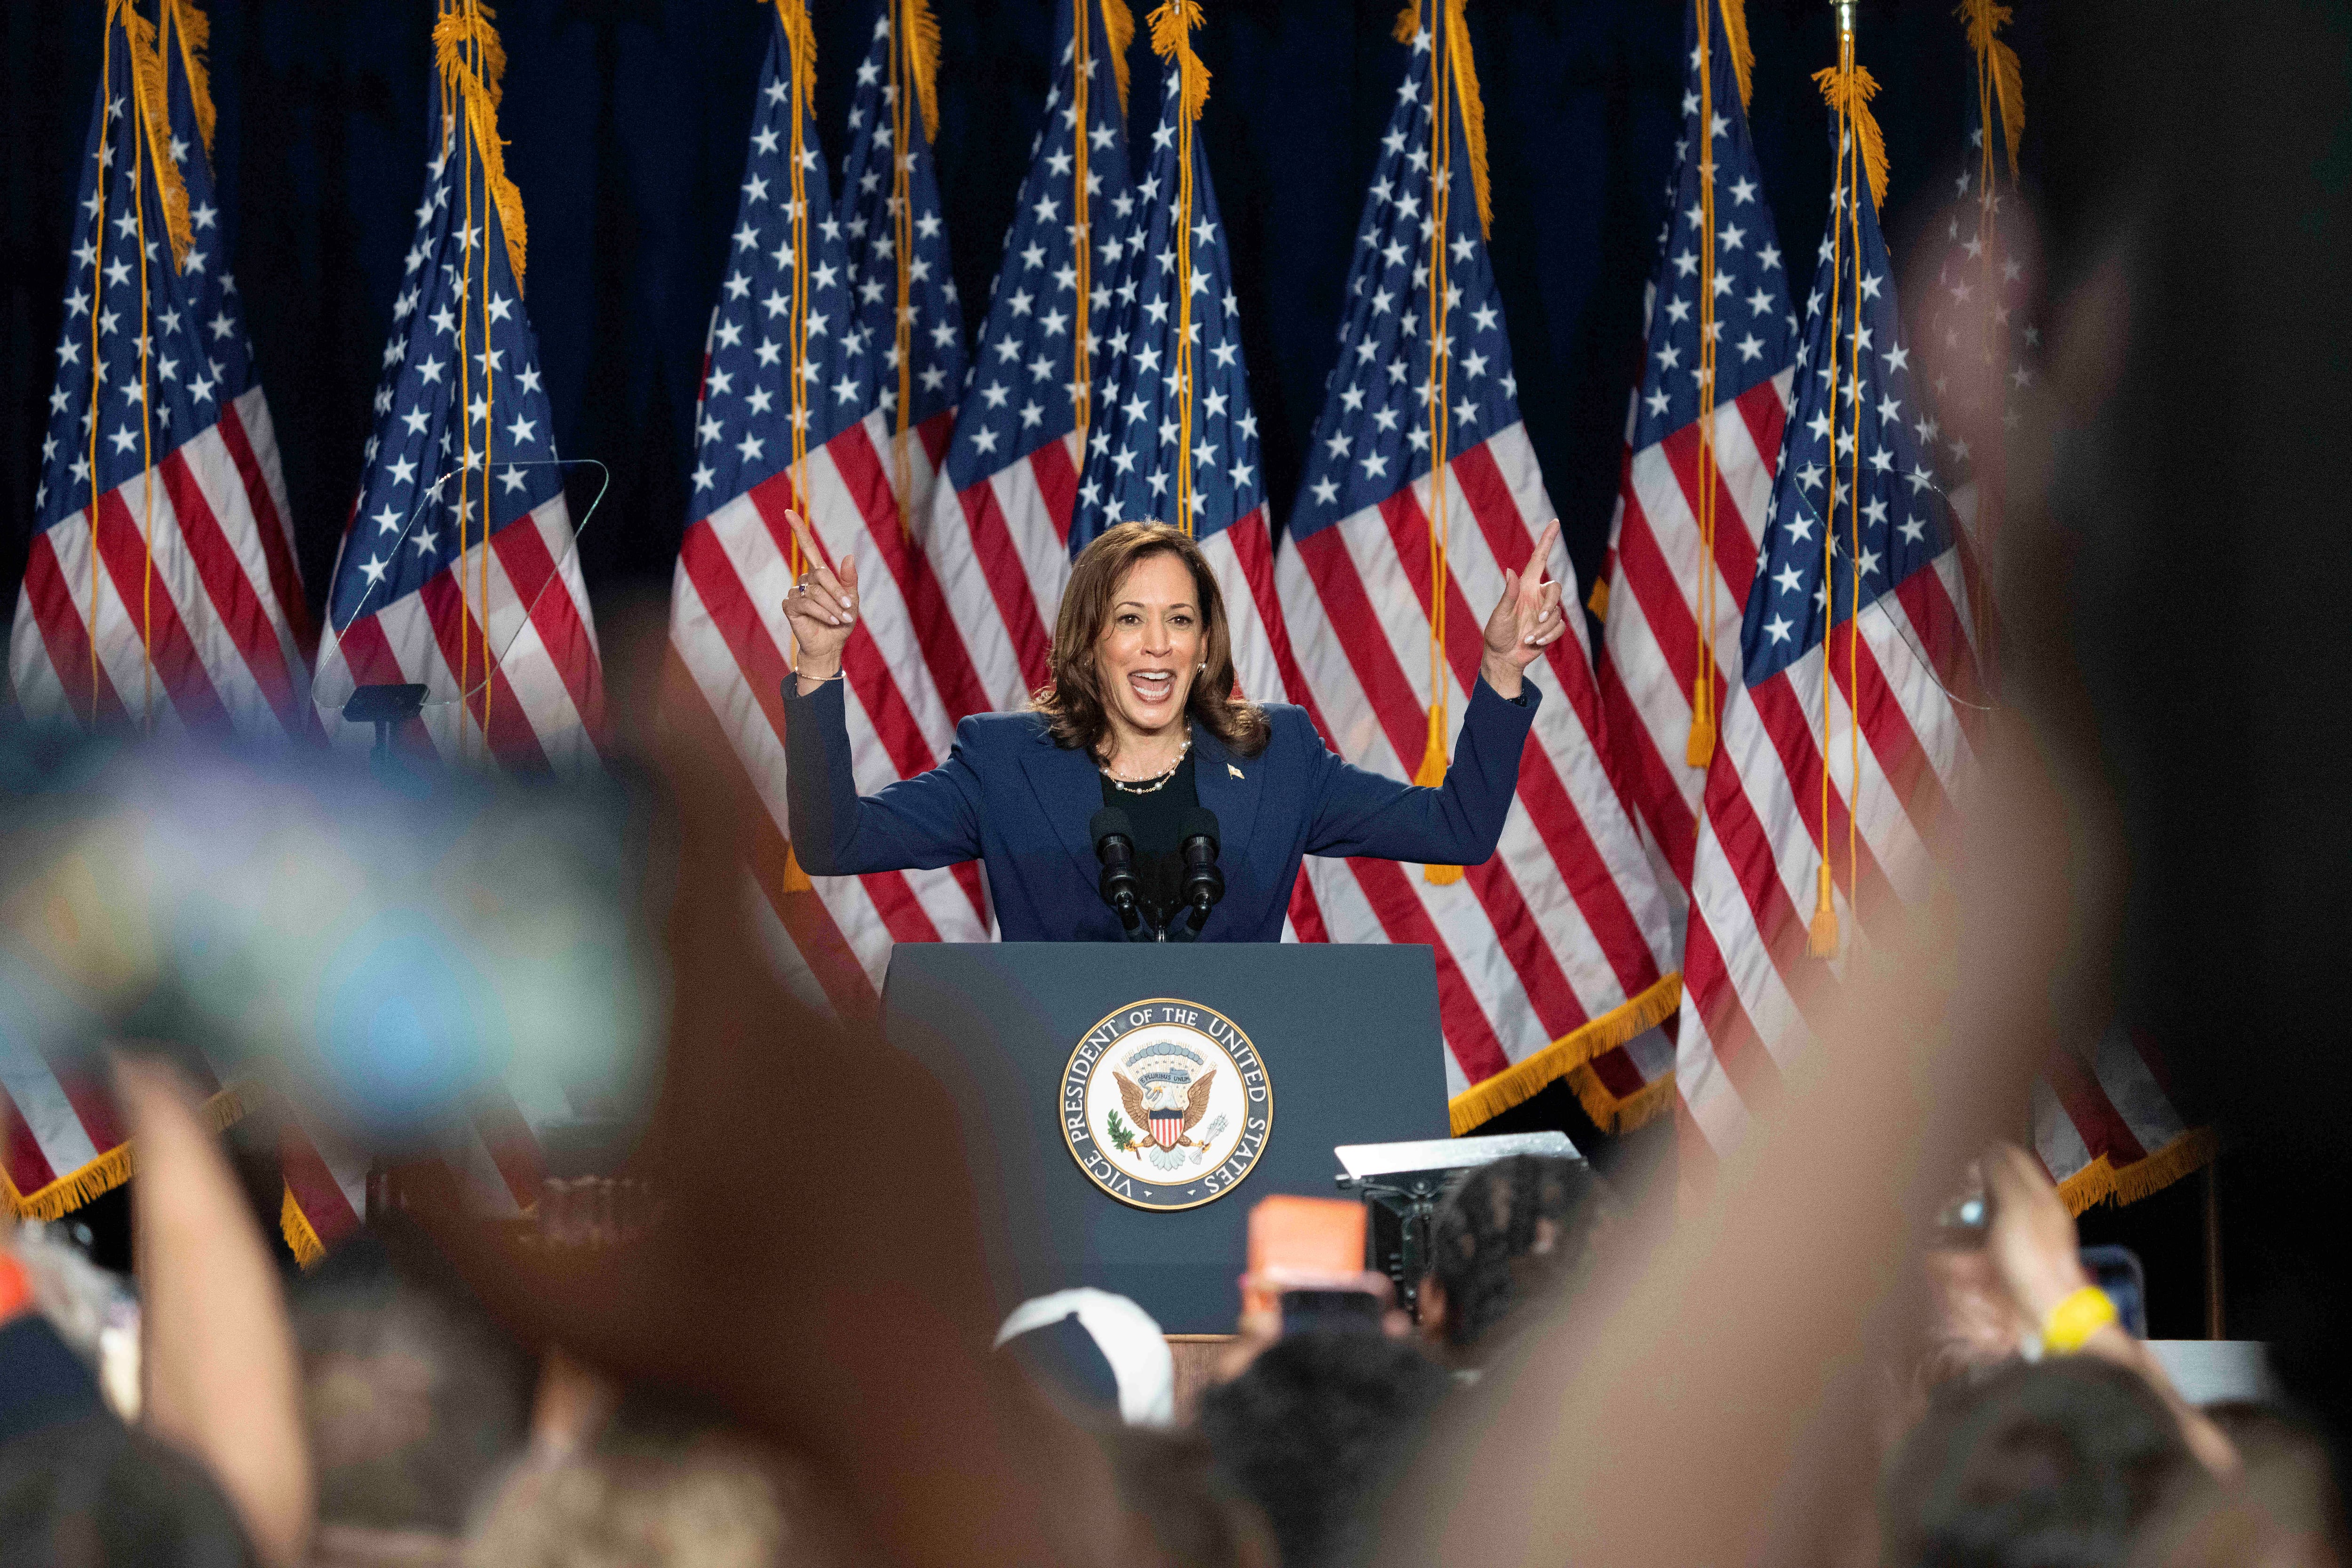 Harris tells roaring Wisconsin crowd November election is ‘a choice between freedom and chaos’